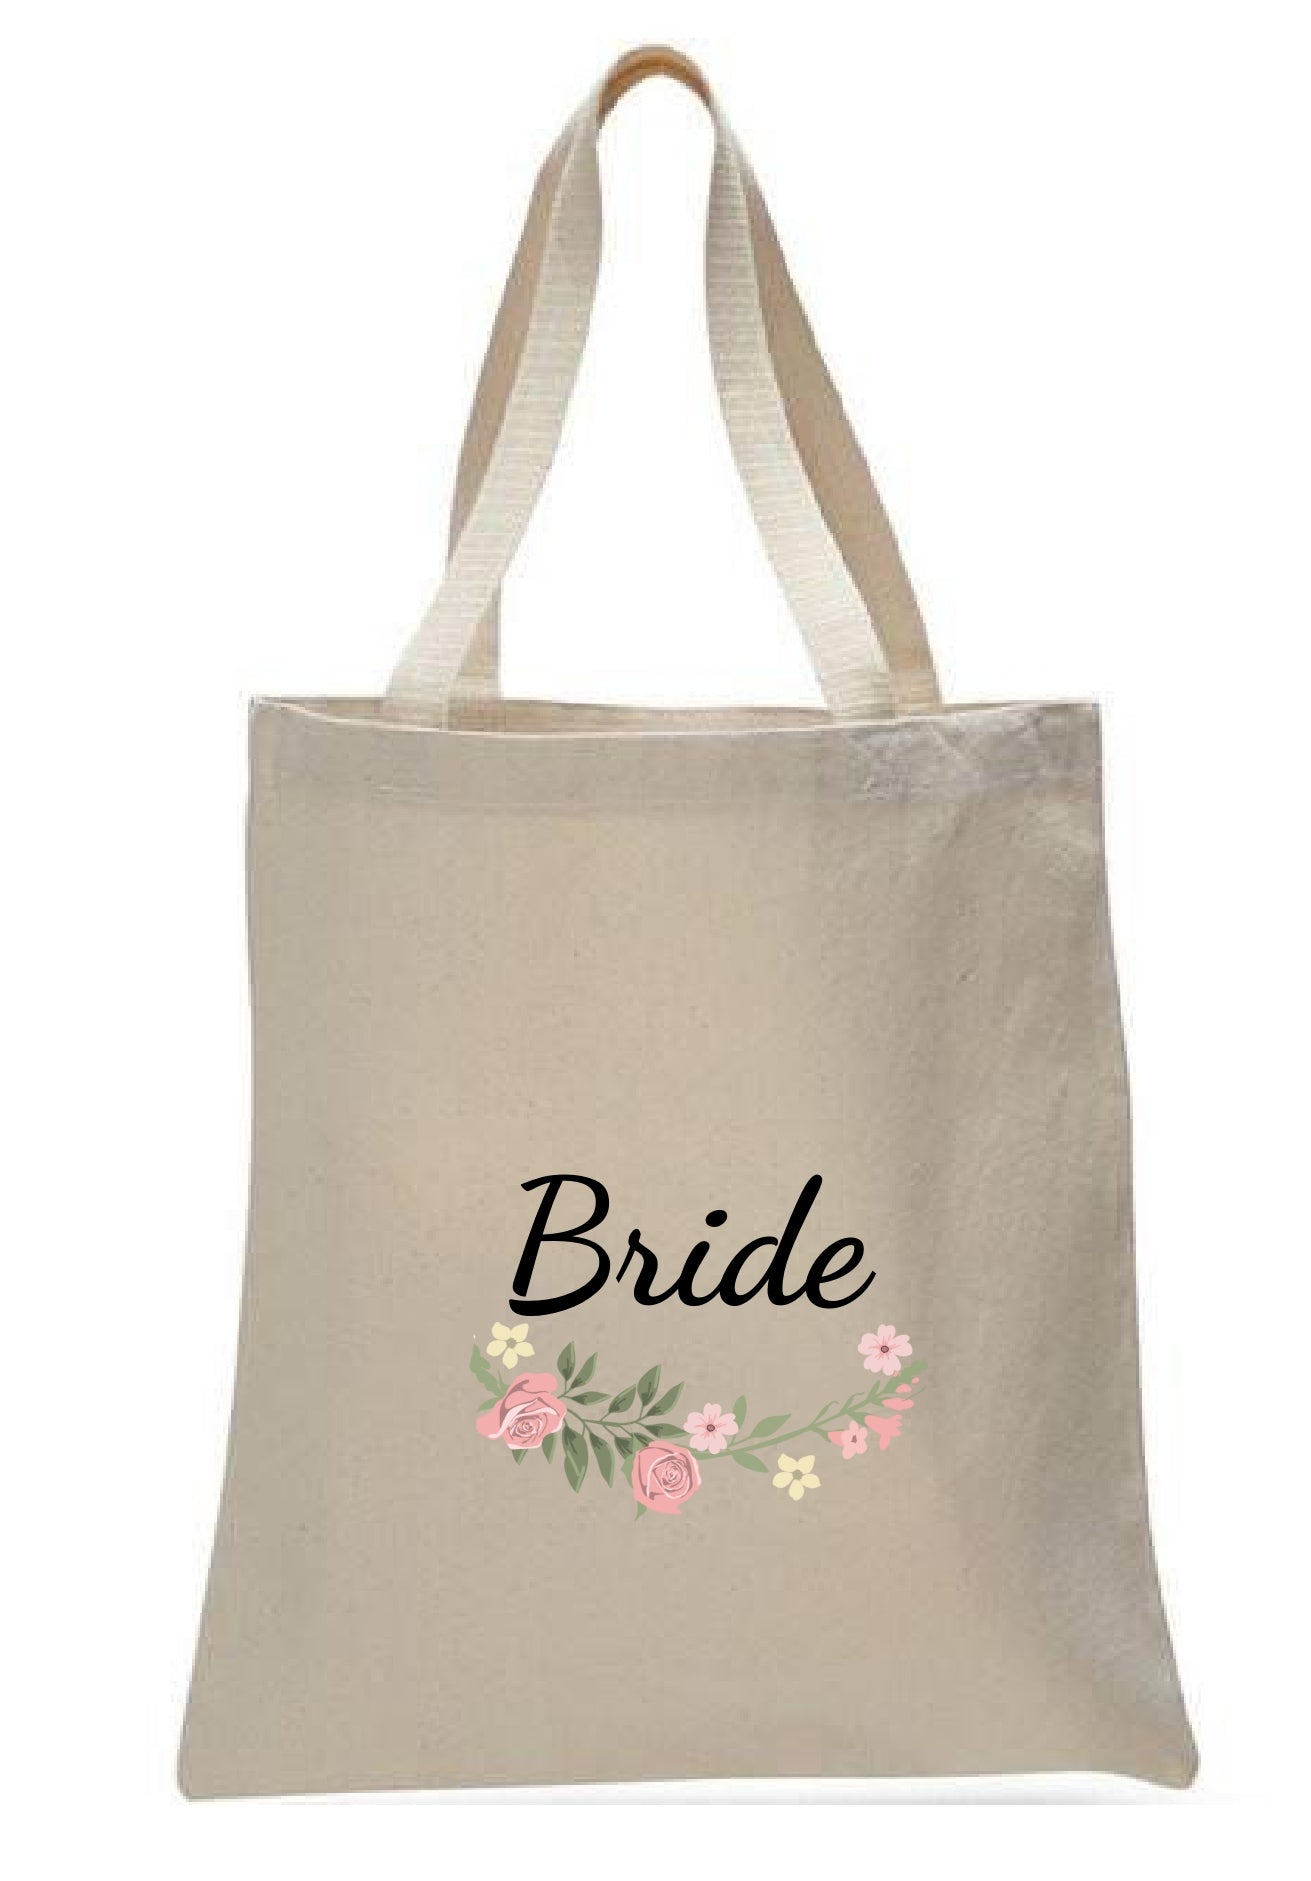 Wedding Canvas Gift Tote Bags, Party Gifts, Bride, WB33